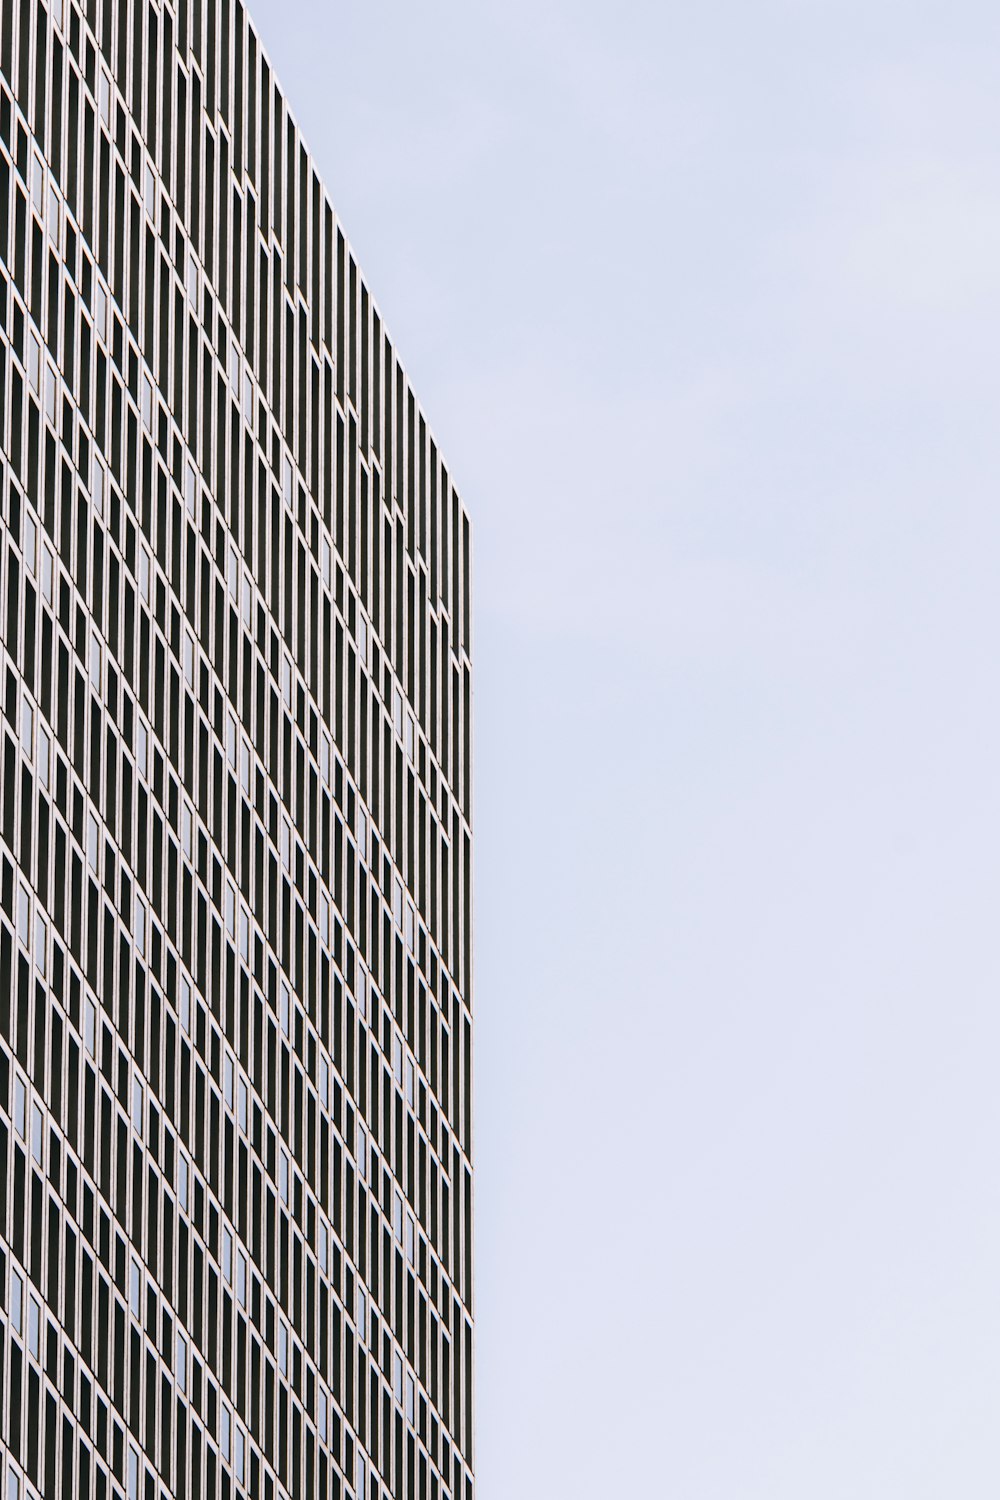 a plane flying in the air near a tall building